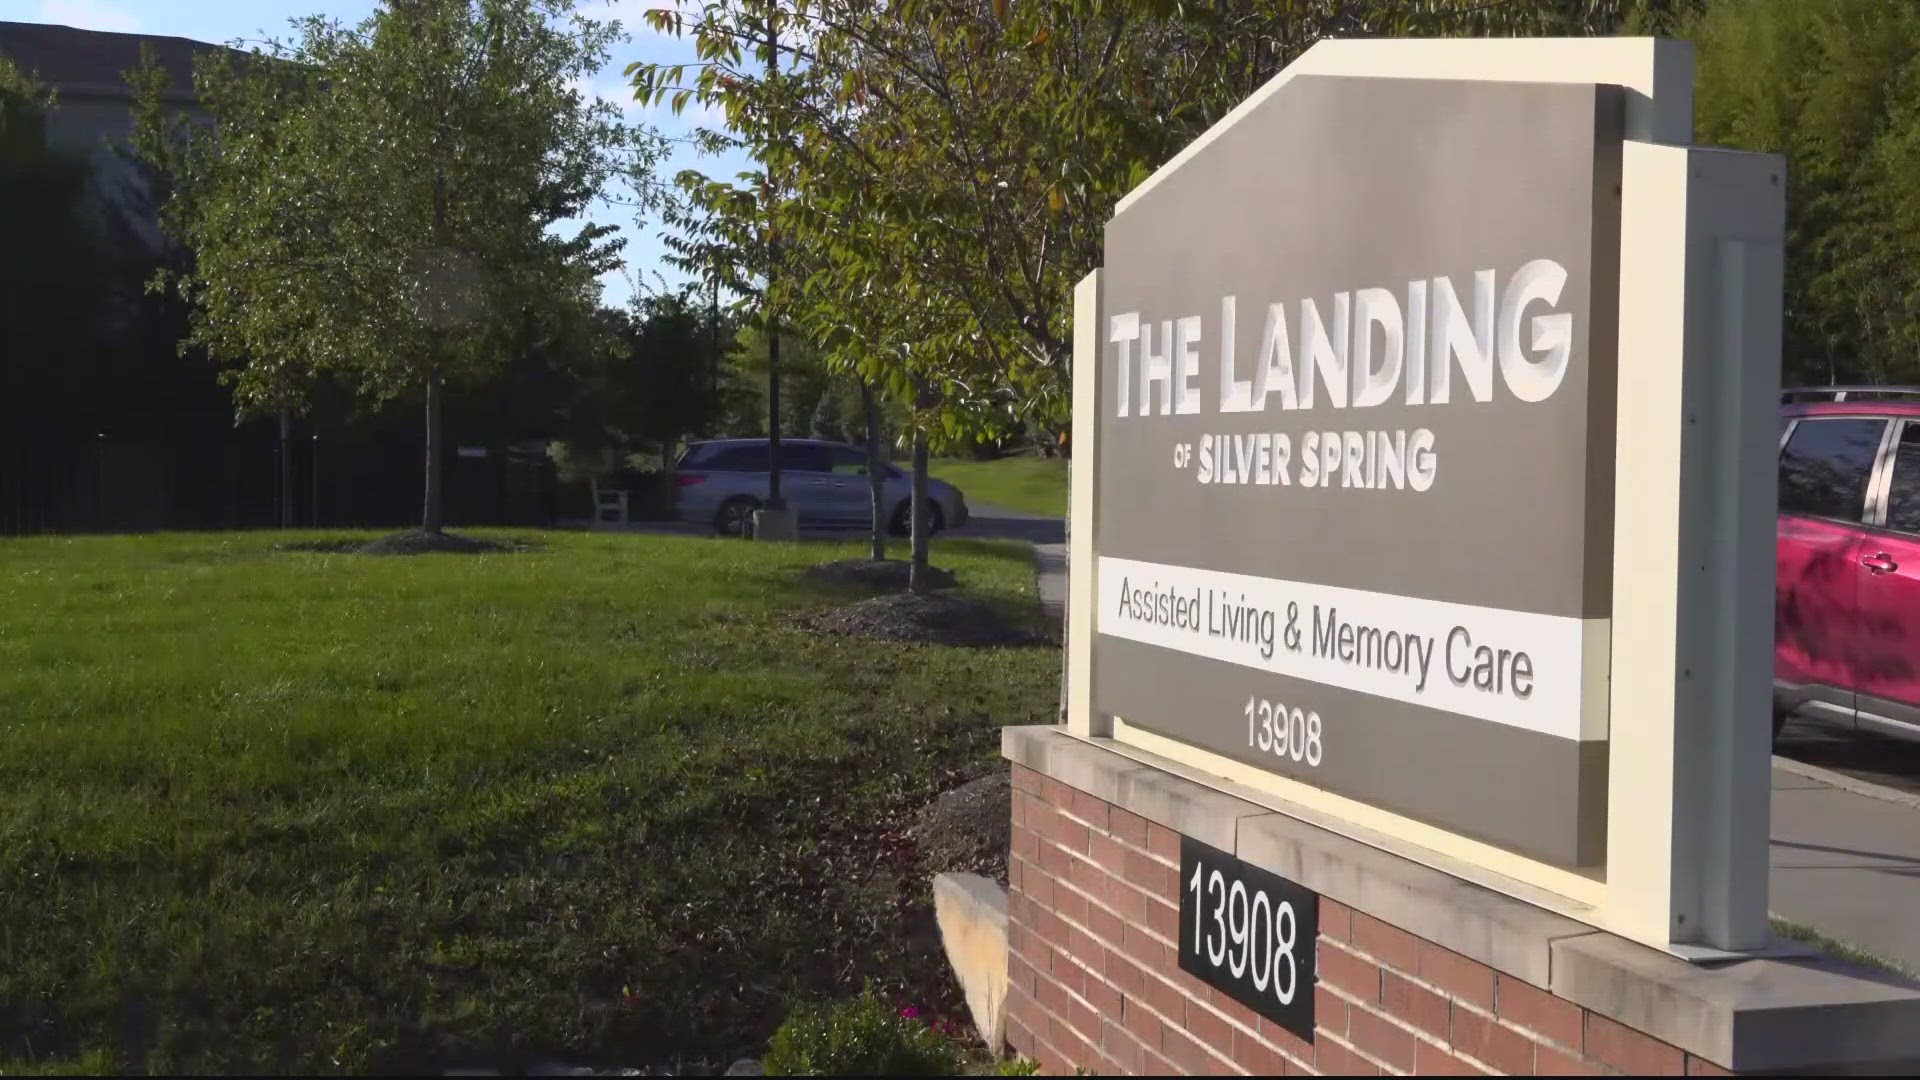 At least 53 stunned elders are facing eviction from a Montgomery Co. assisted living and memory care facility.